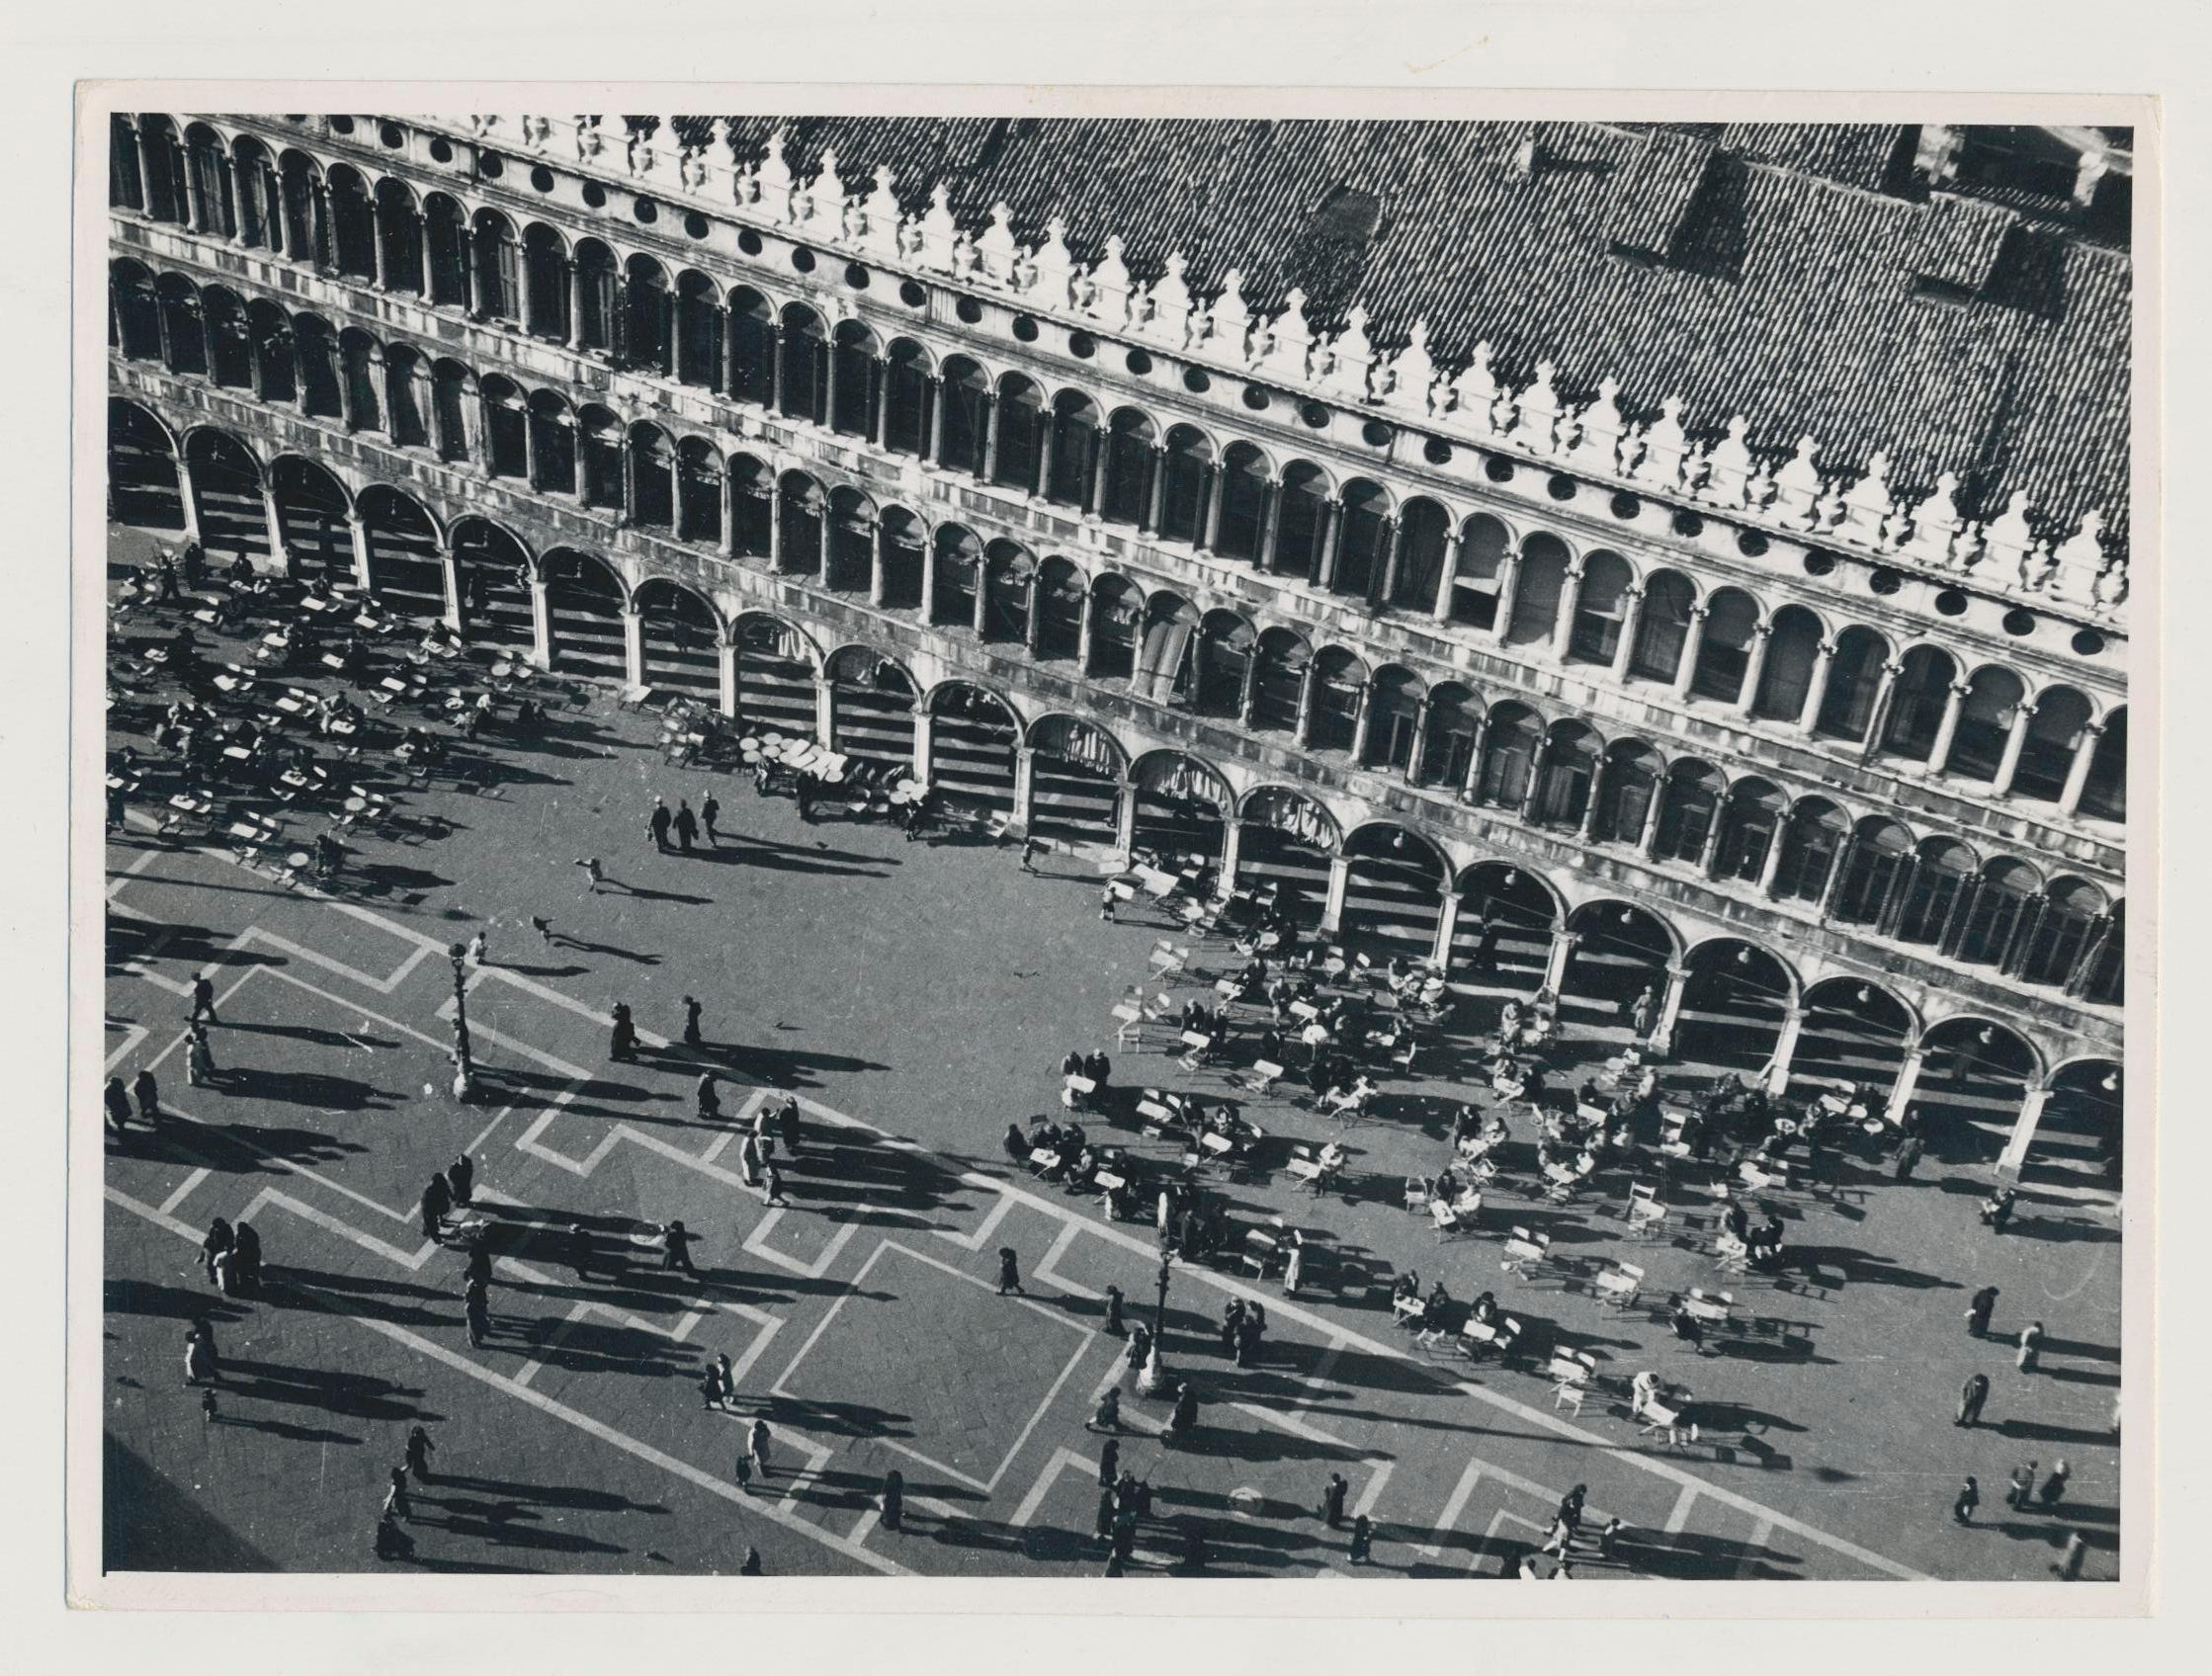 Erich Andres Black and White Photograph – Venice - Crowded Marksquare, Italien, 1950er Jahre, 13 x 17, 8 cm